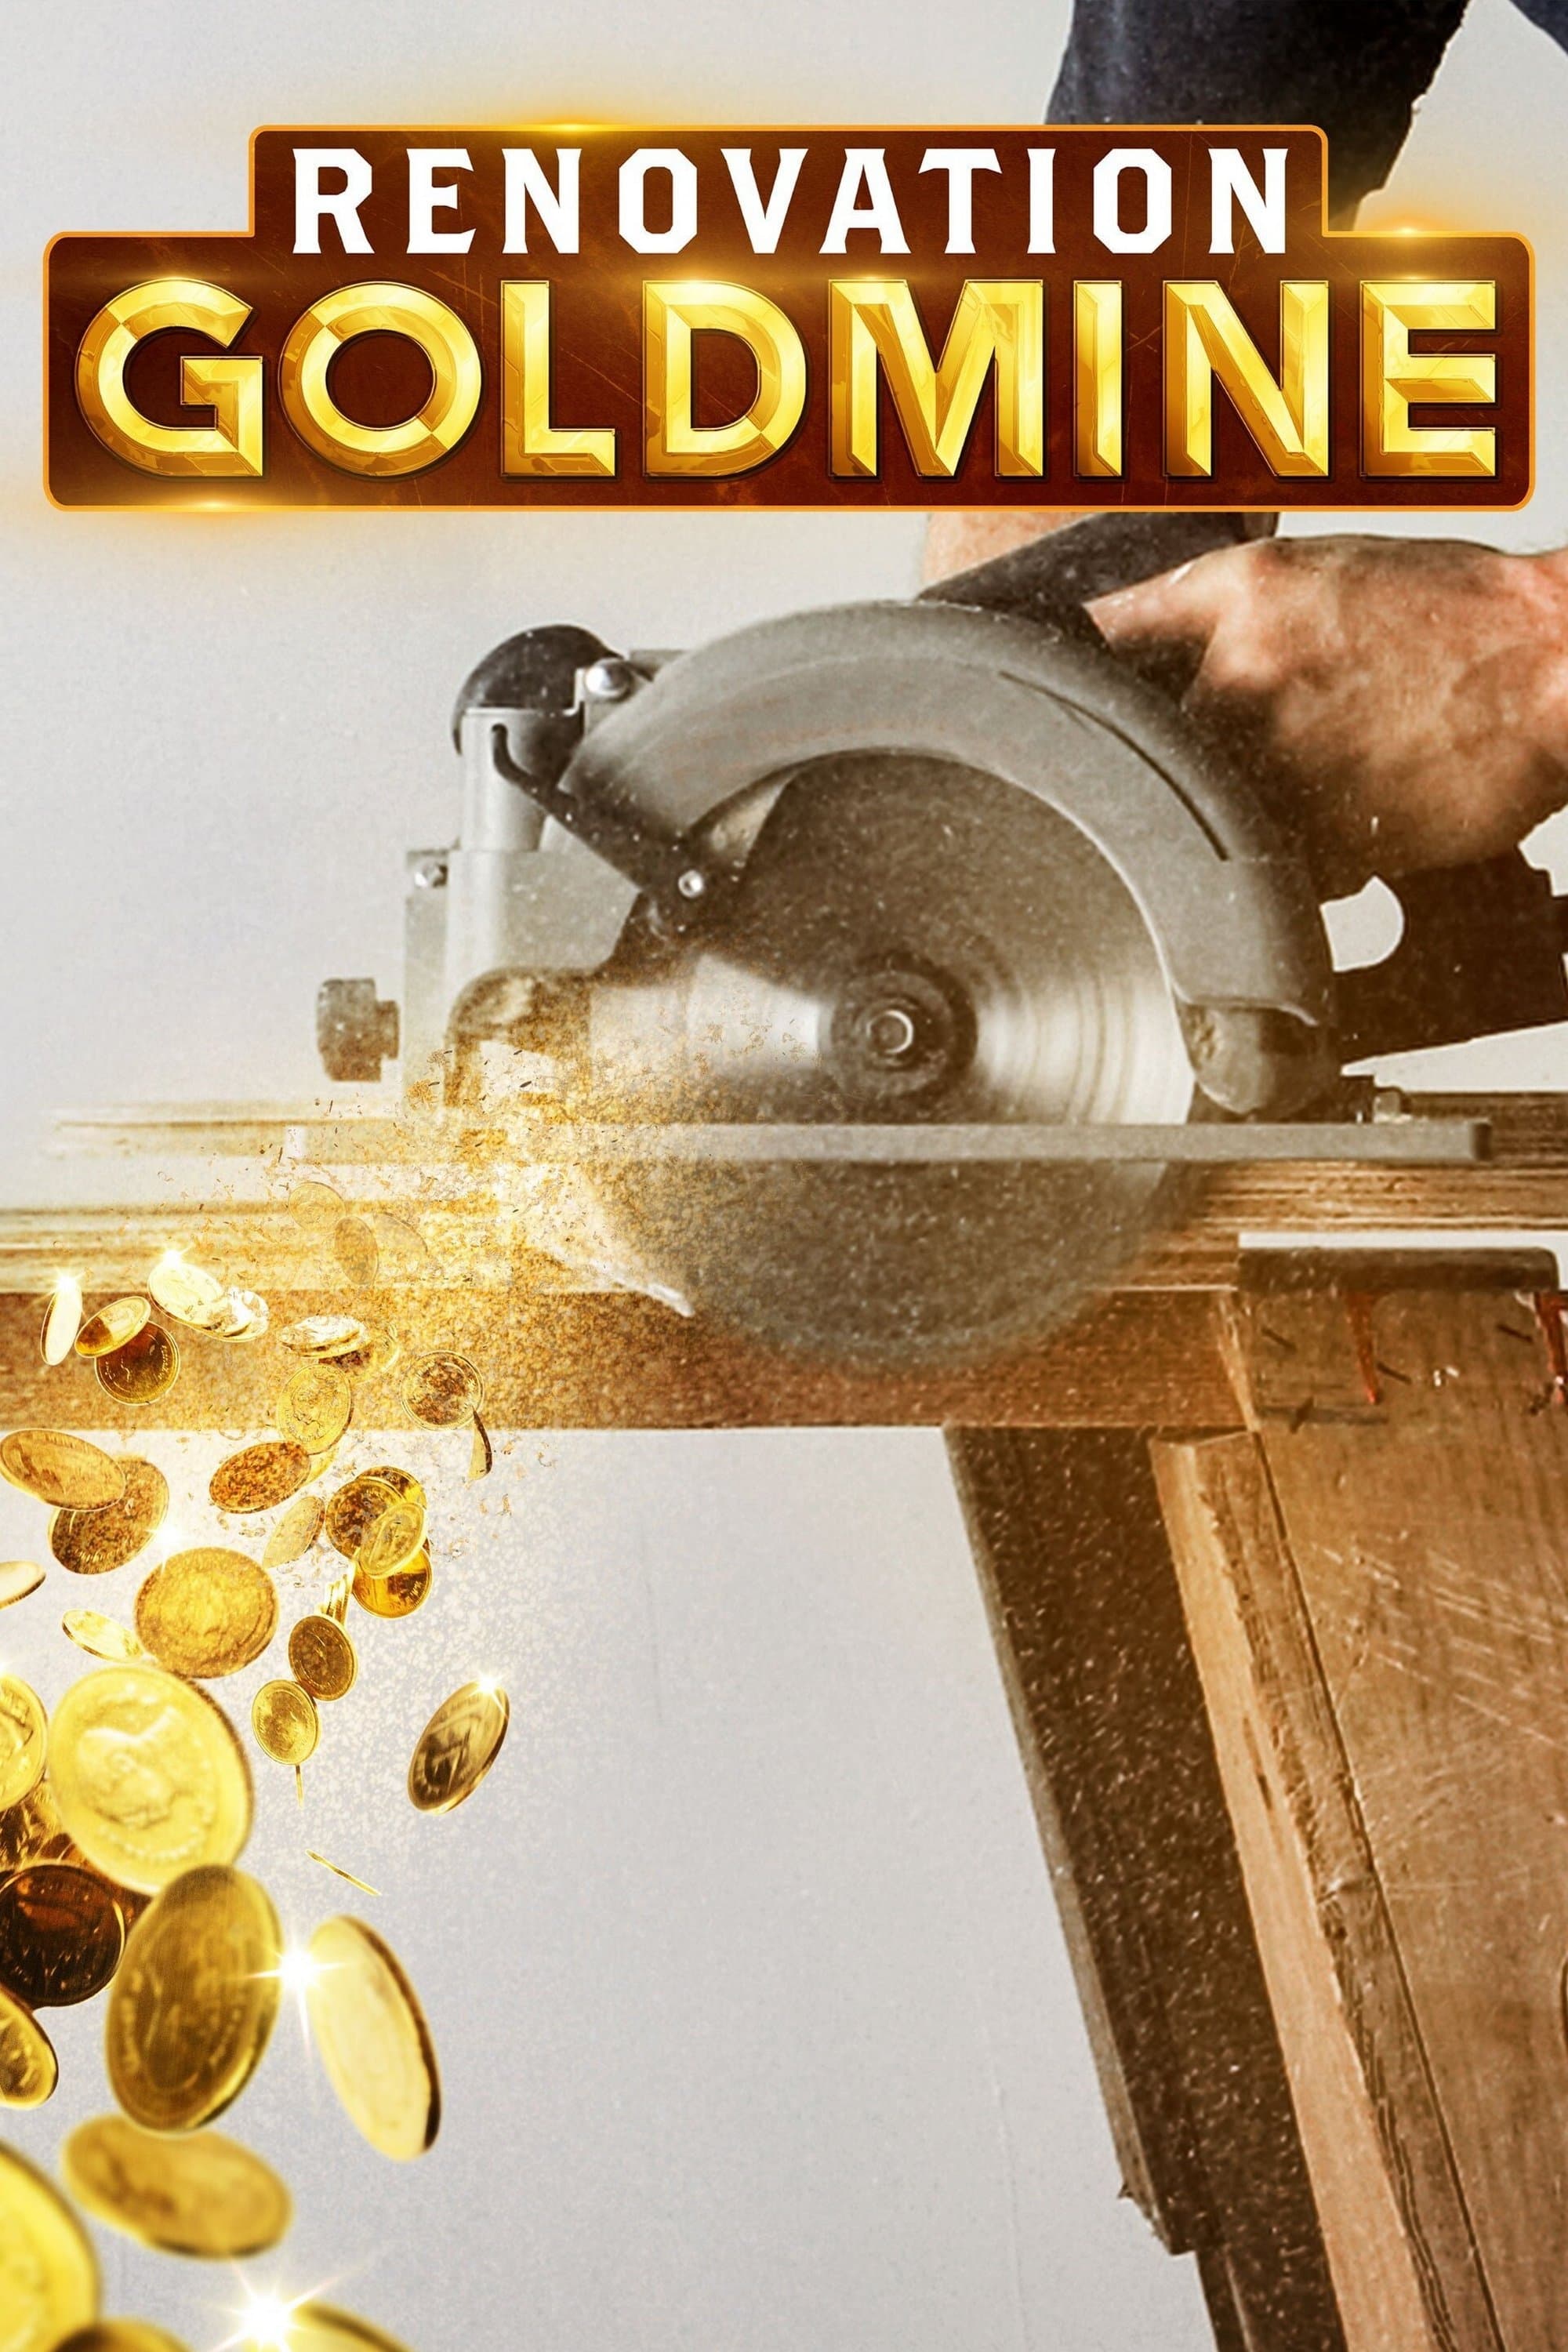 Renovation Goldmine TV Shows About Home